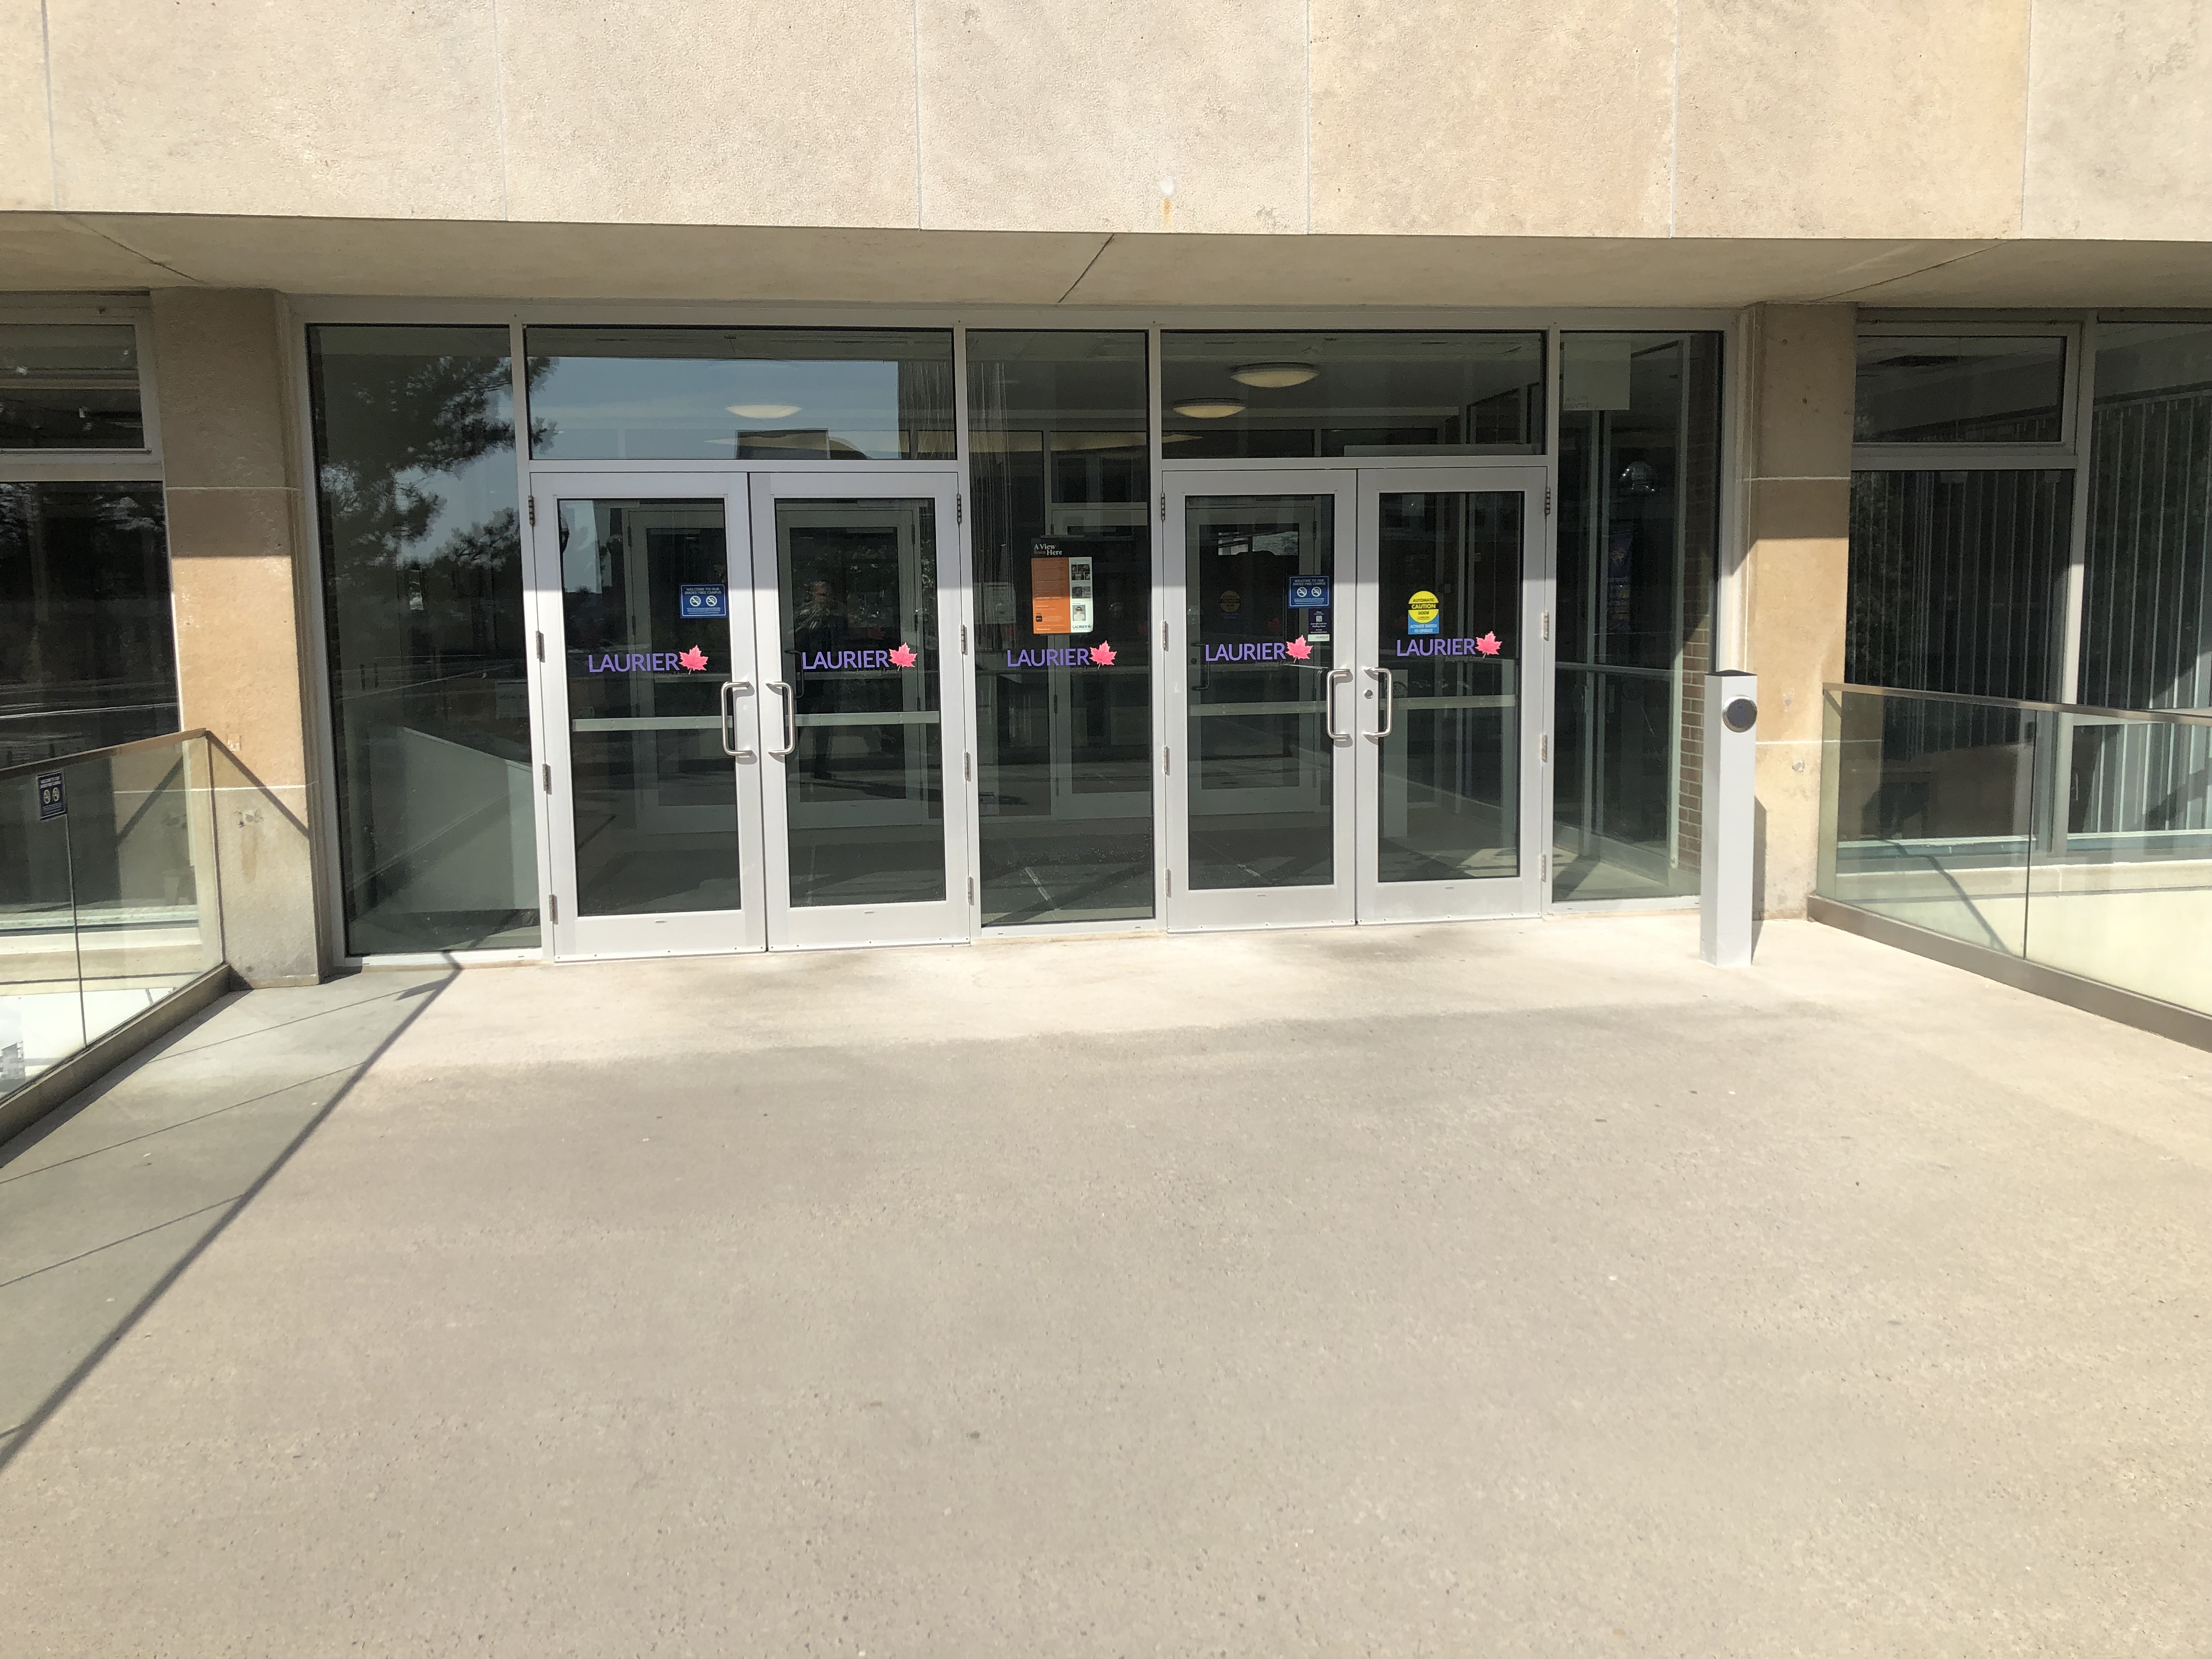 Across the landing, which has hand rails on either side, are two sets of double doors to enter the library. Facing the library, on the right is a square bollard that has a round push button to open the doors automatically